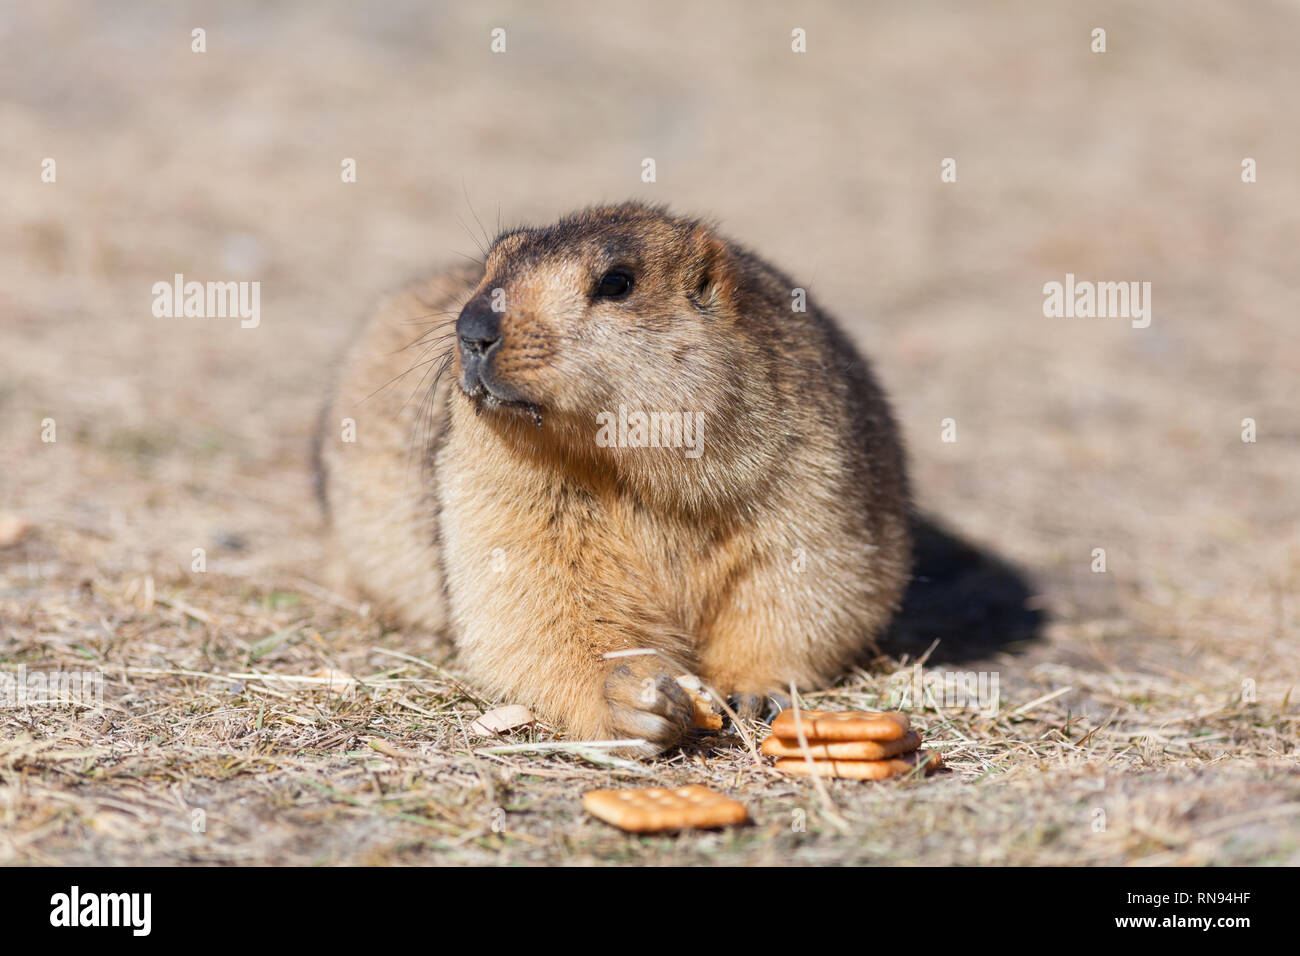 Irresponsible tourism: marmot eating biscuits brought by the tourists despite the nearby board asking for not feeding wild animals, Ladakh, India Stock Photo